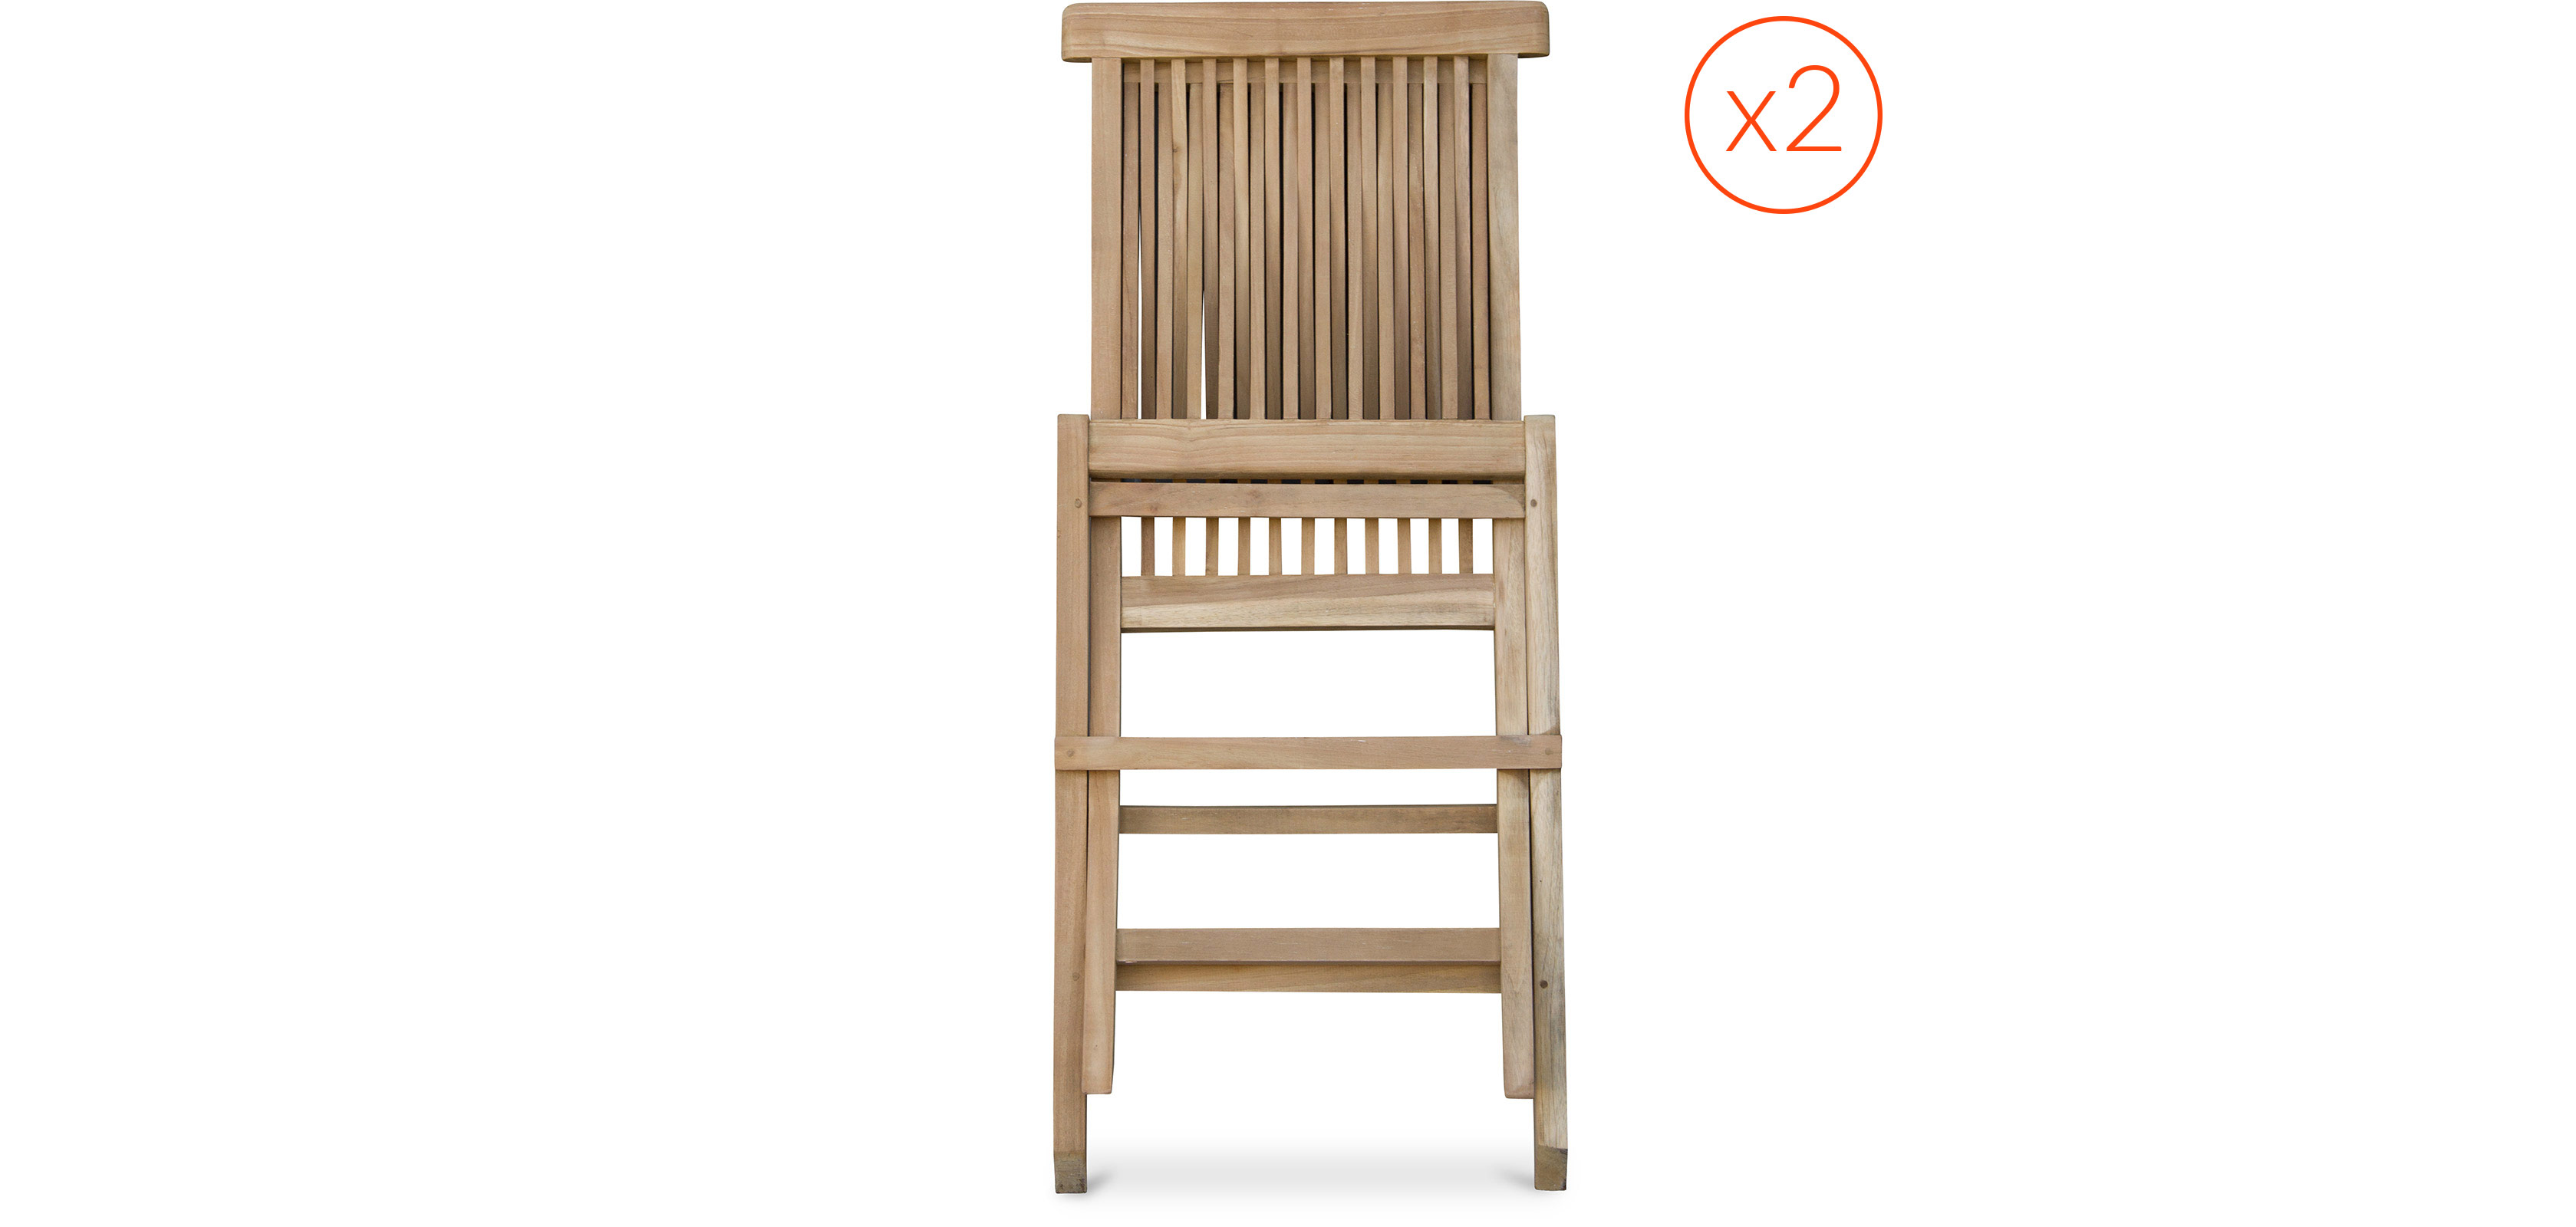 Pack of 2 - Solid teak garden folding chair - Style